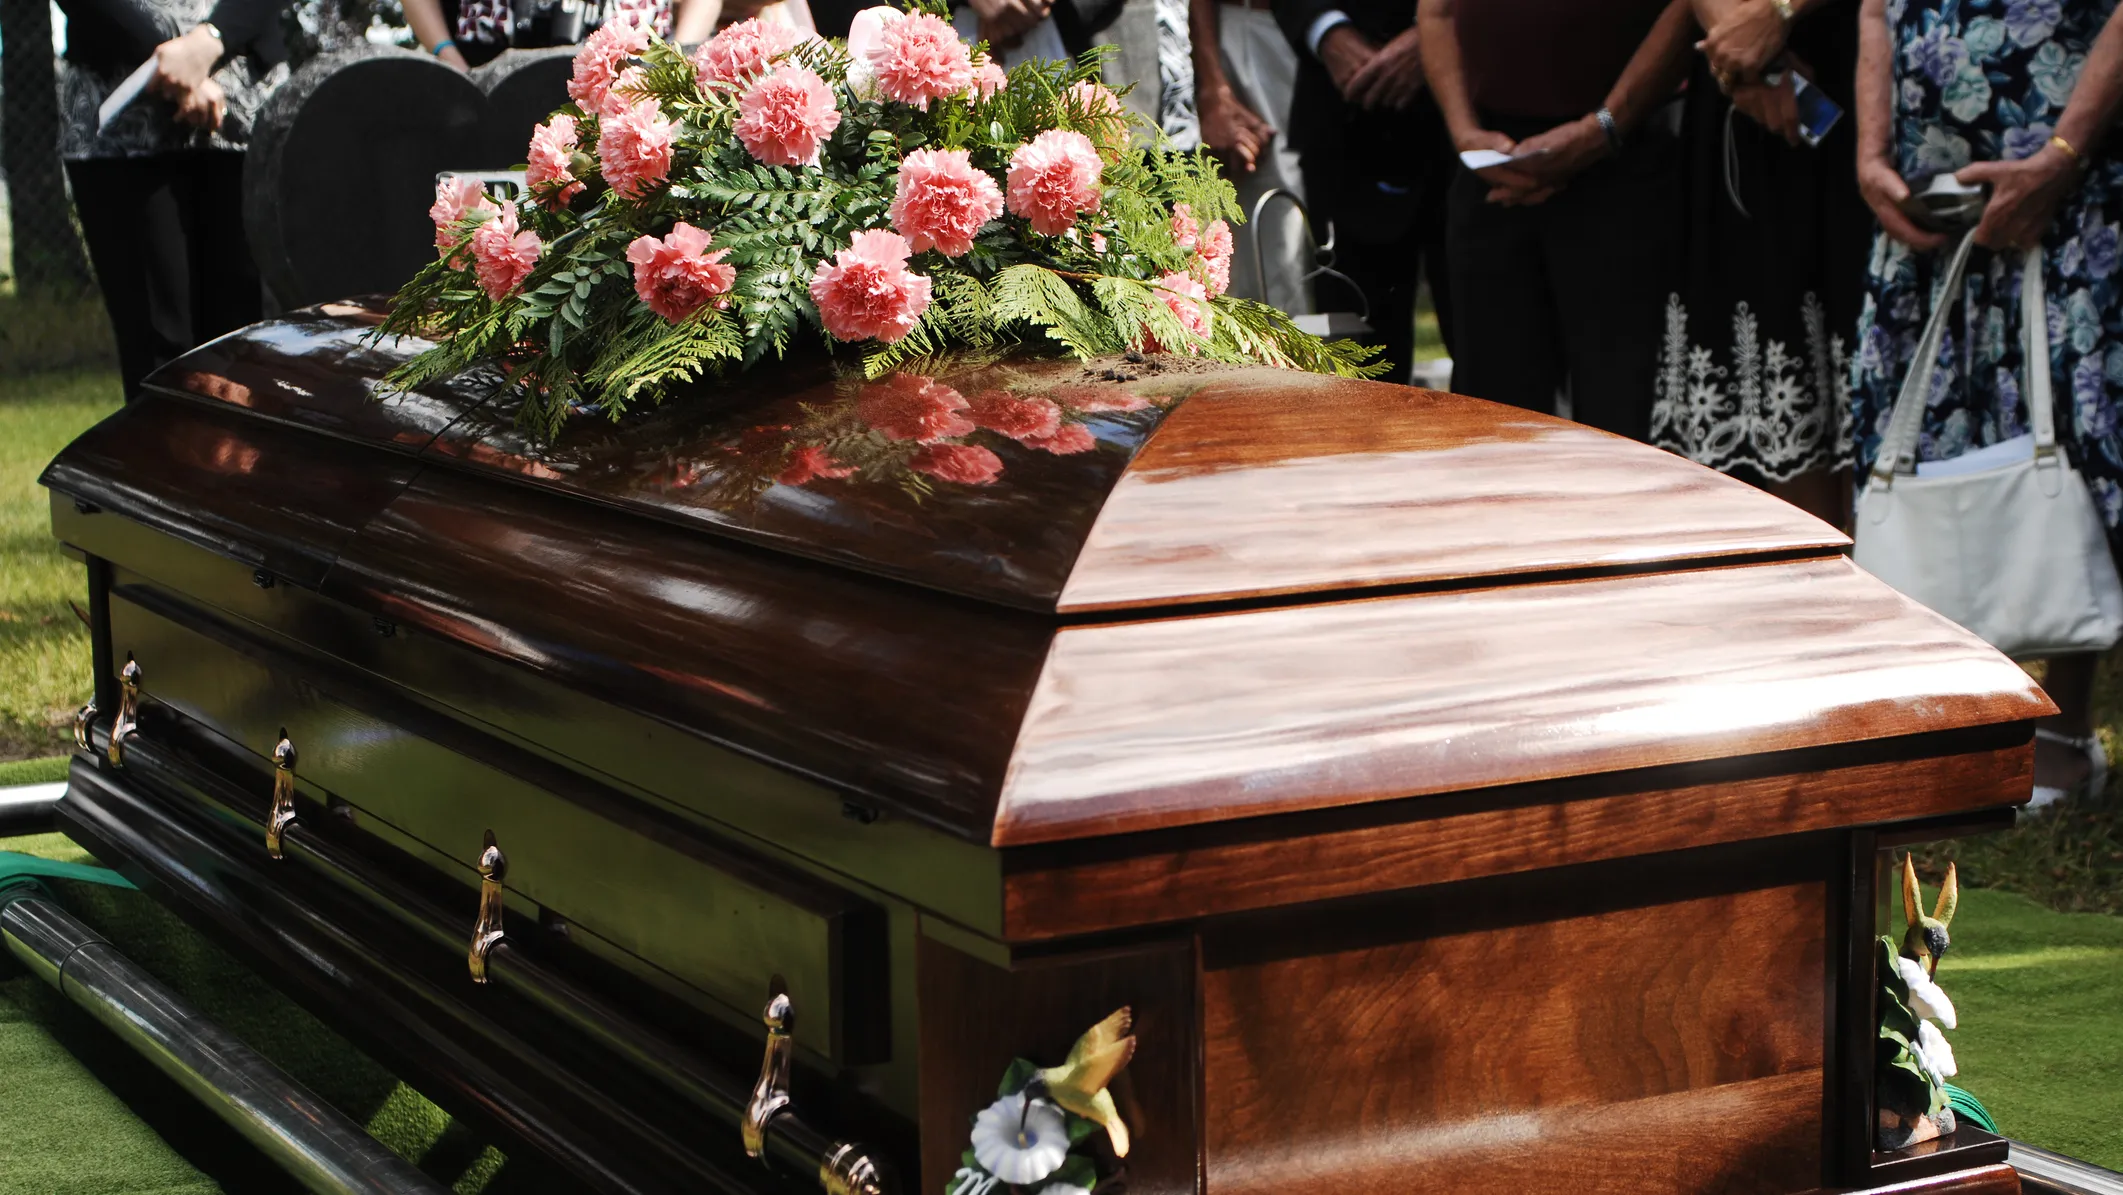 How Long Between Death and Funeral in the UK?